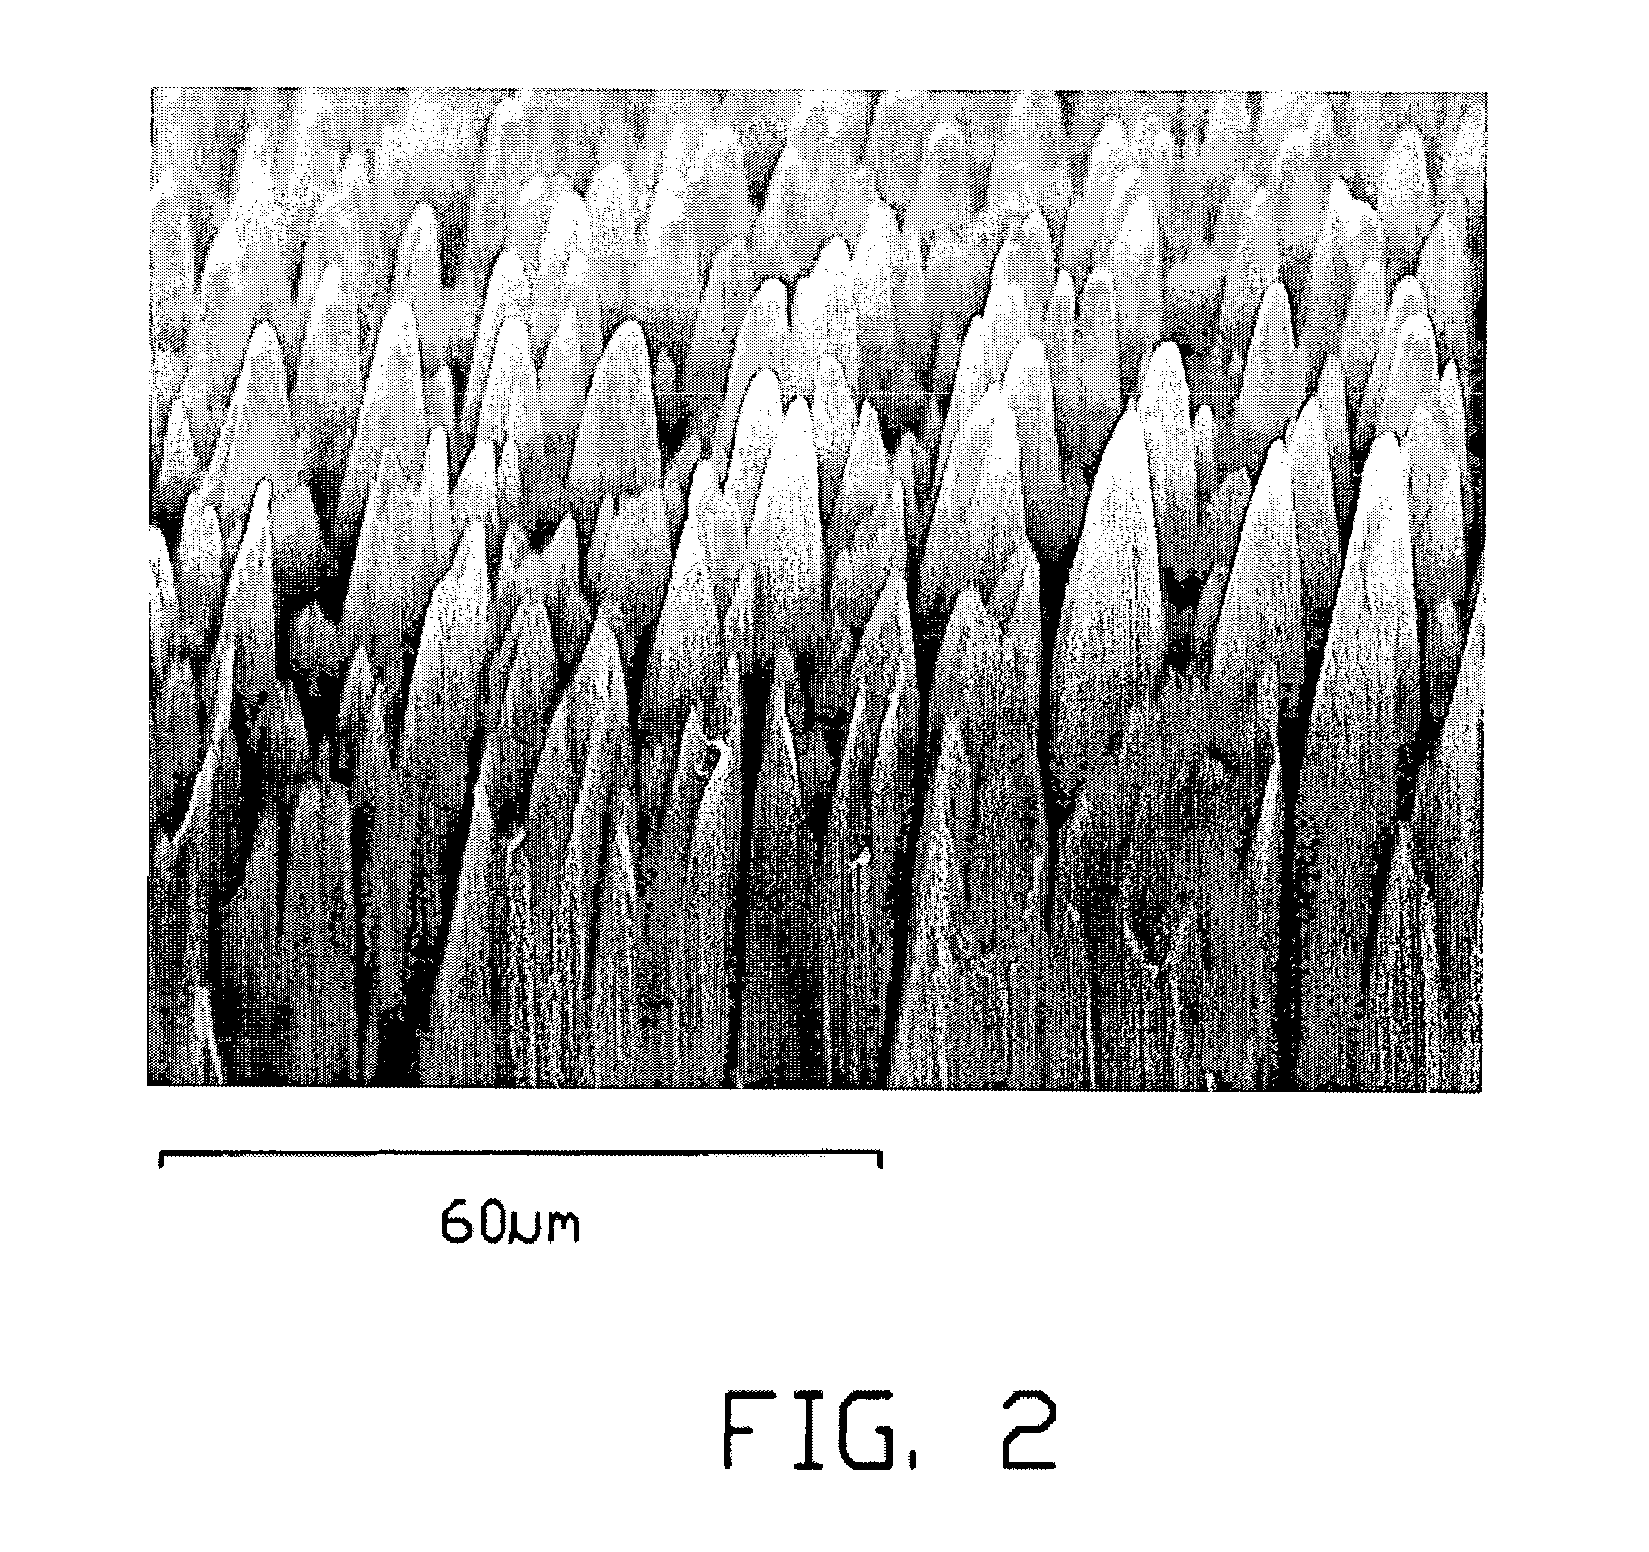 Carbon nanotube array and field emission device using same